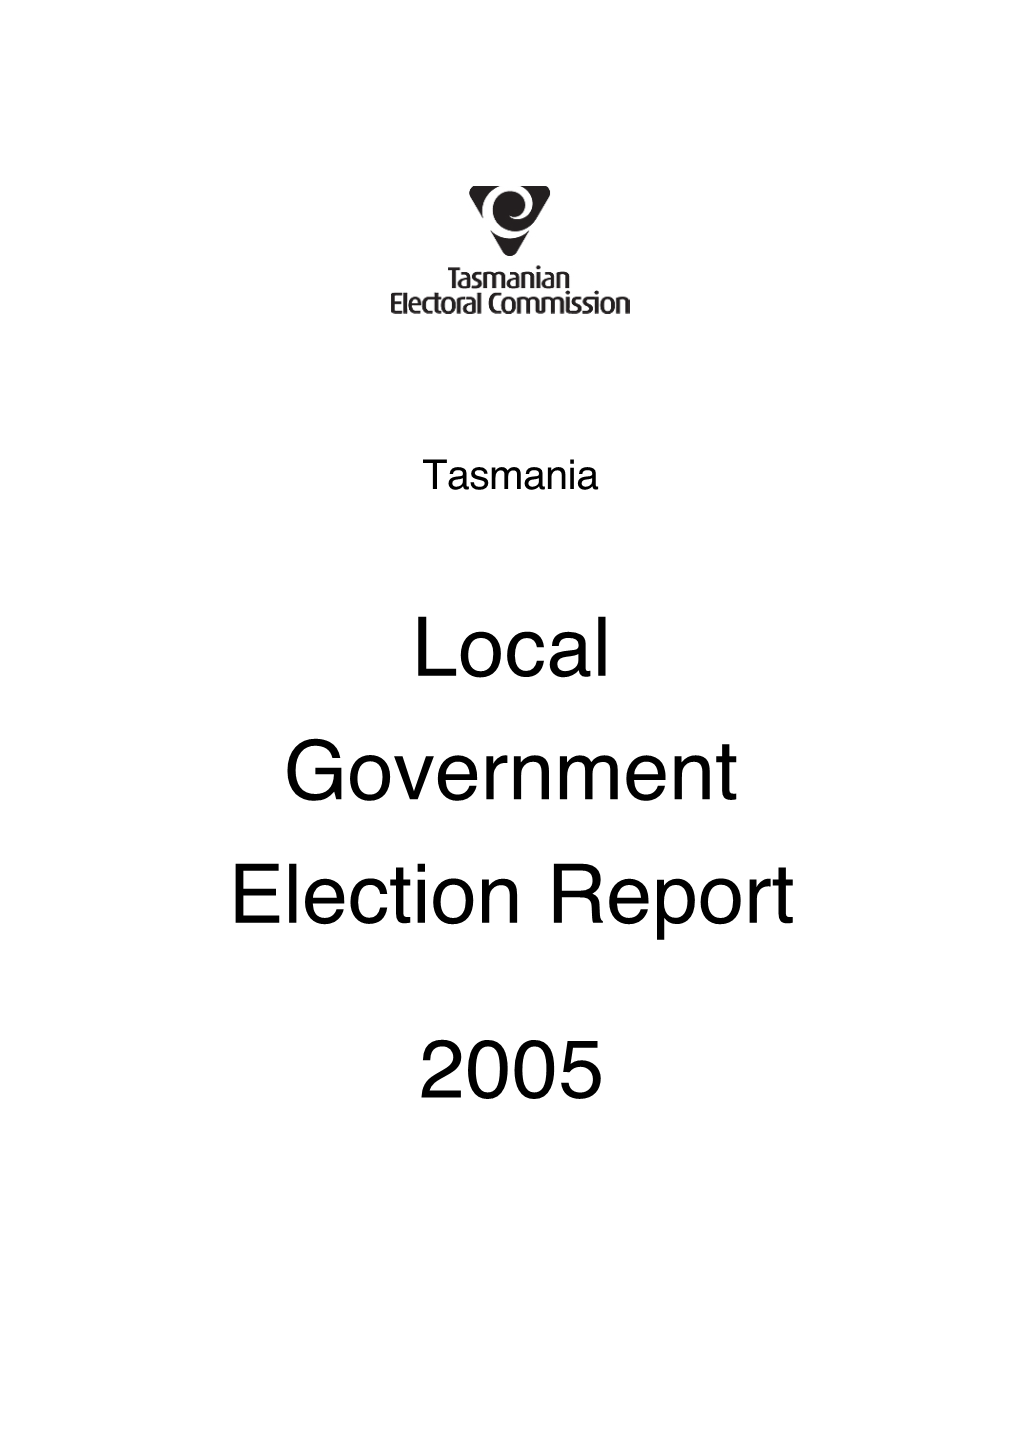 Local Government Election Report 2005